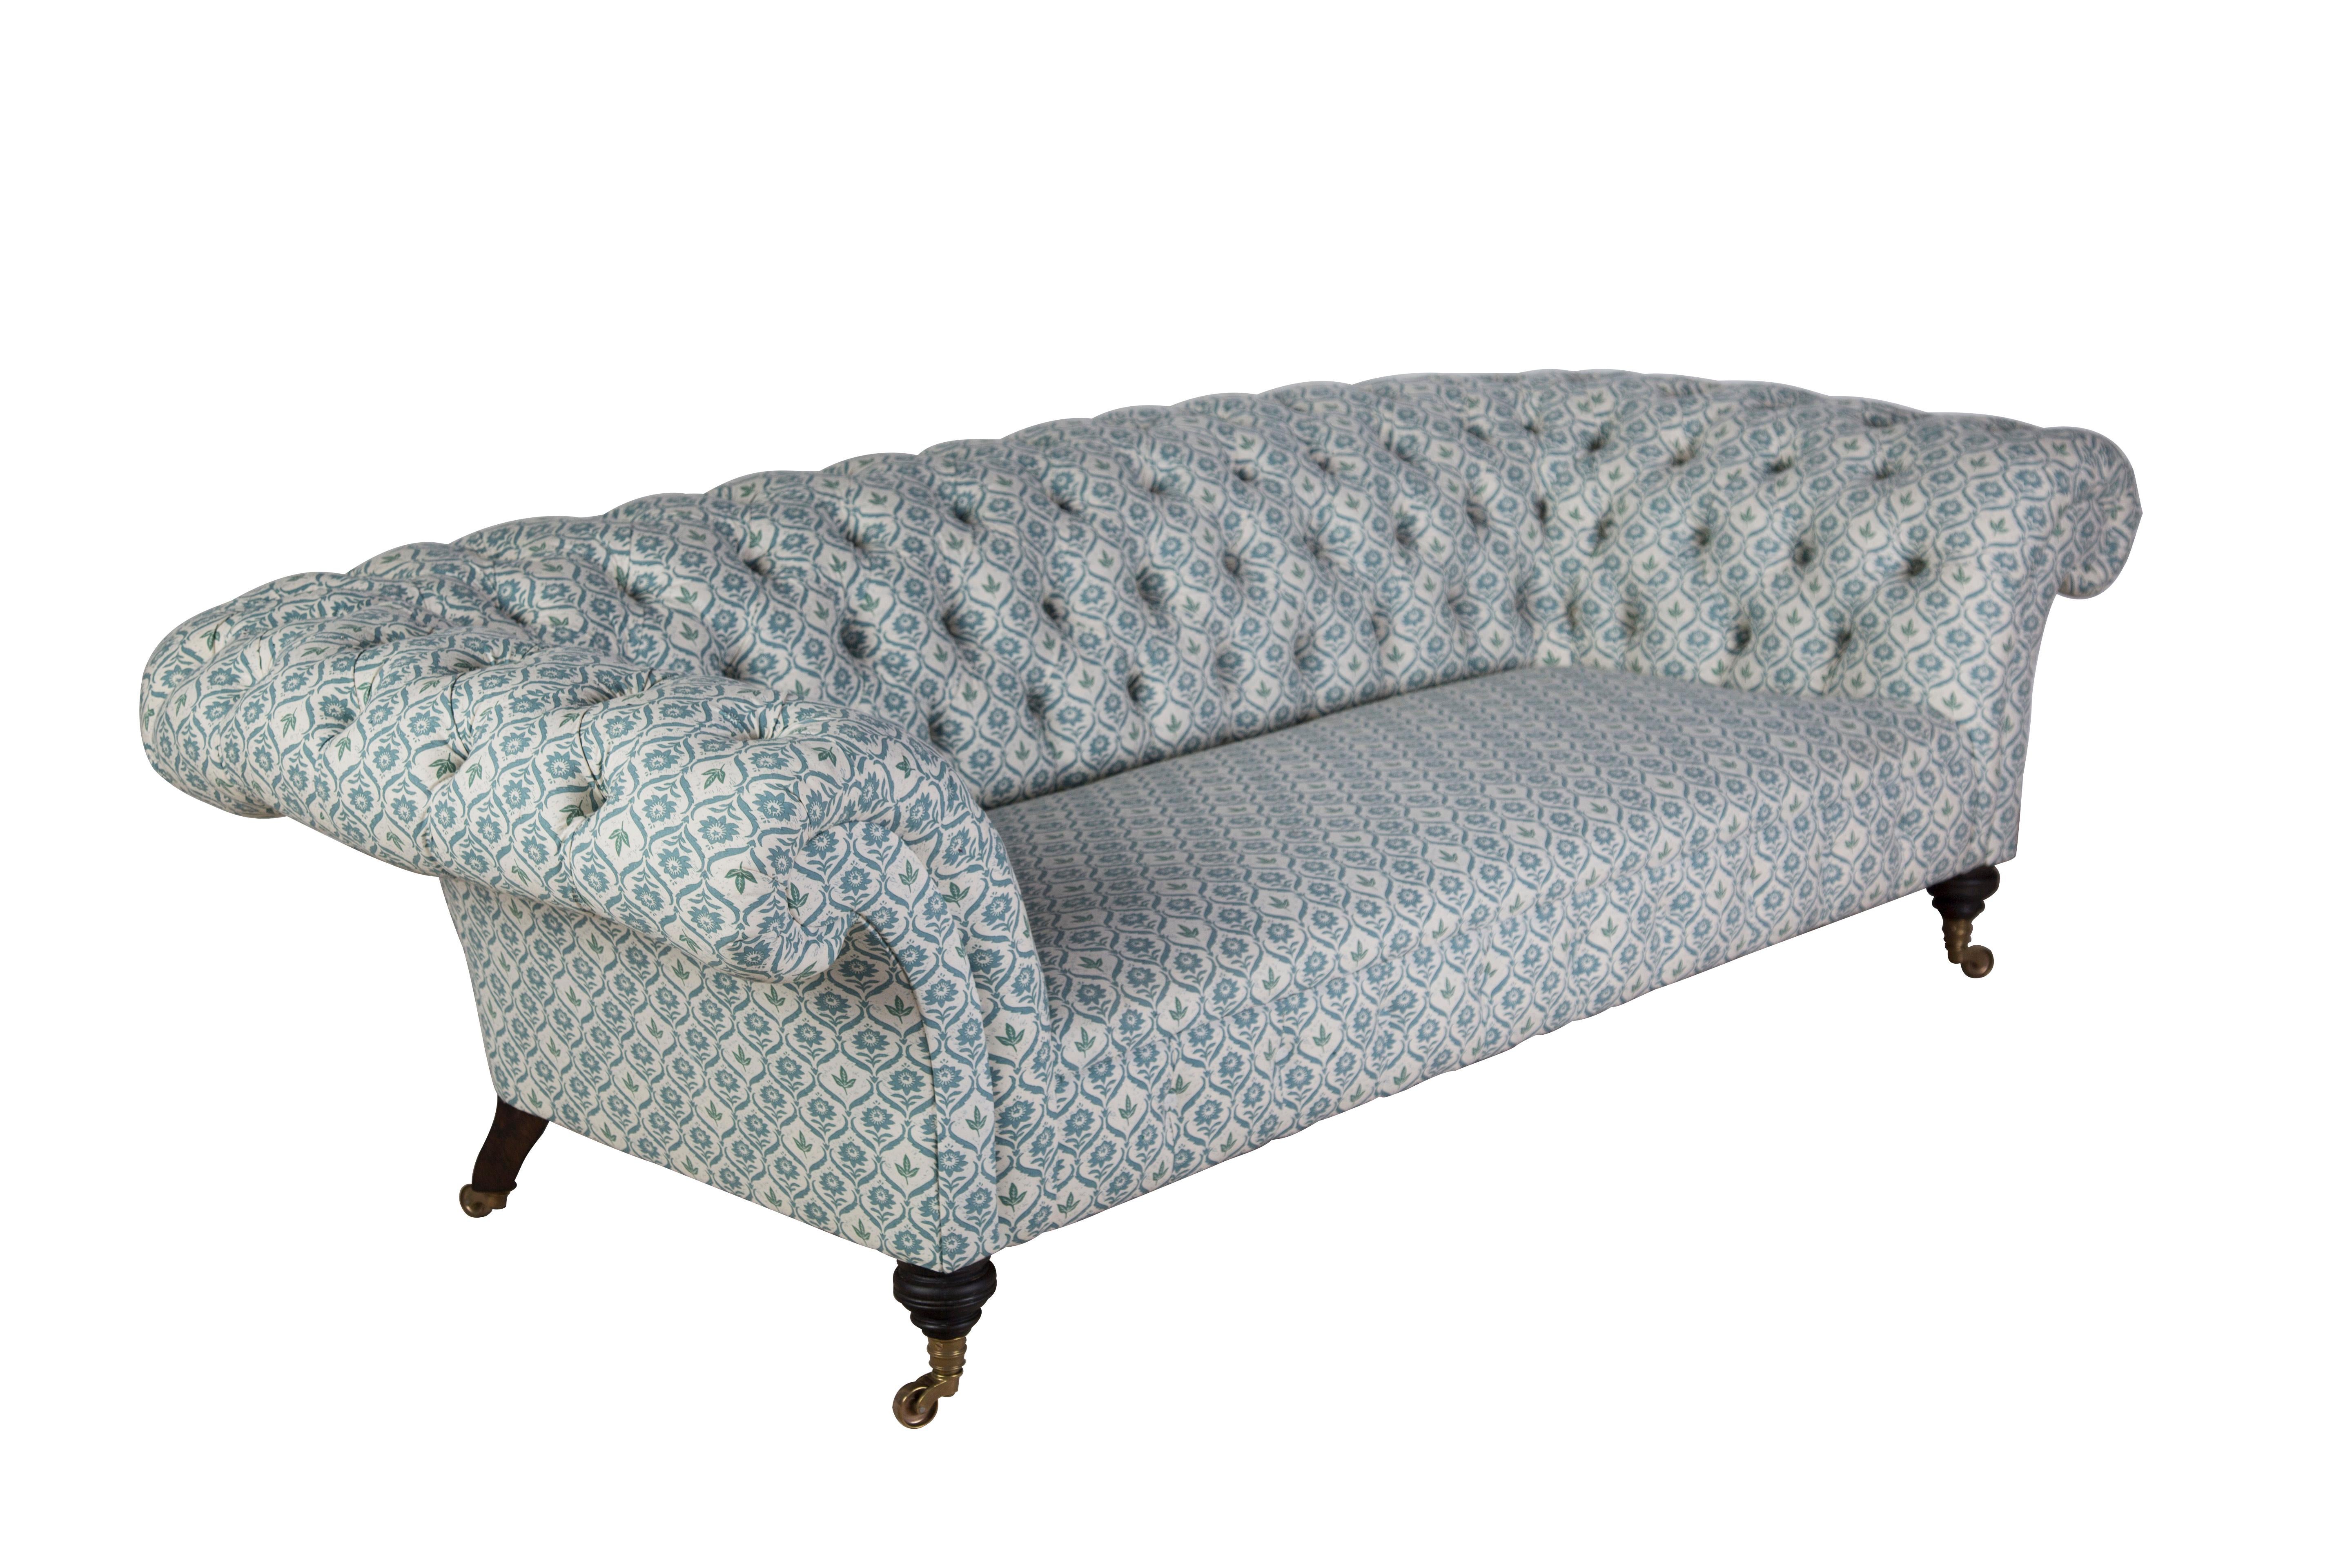 The Hampstead is based on a traditional Howard & Sons Chesterfield sofa. An enduring classic, with a graceful sweep to the arms and deep buttoning detail. 

We build our Hampstead up from a hardwood beech frame, using only traditional methods and